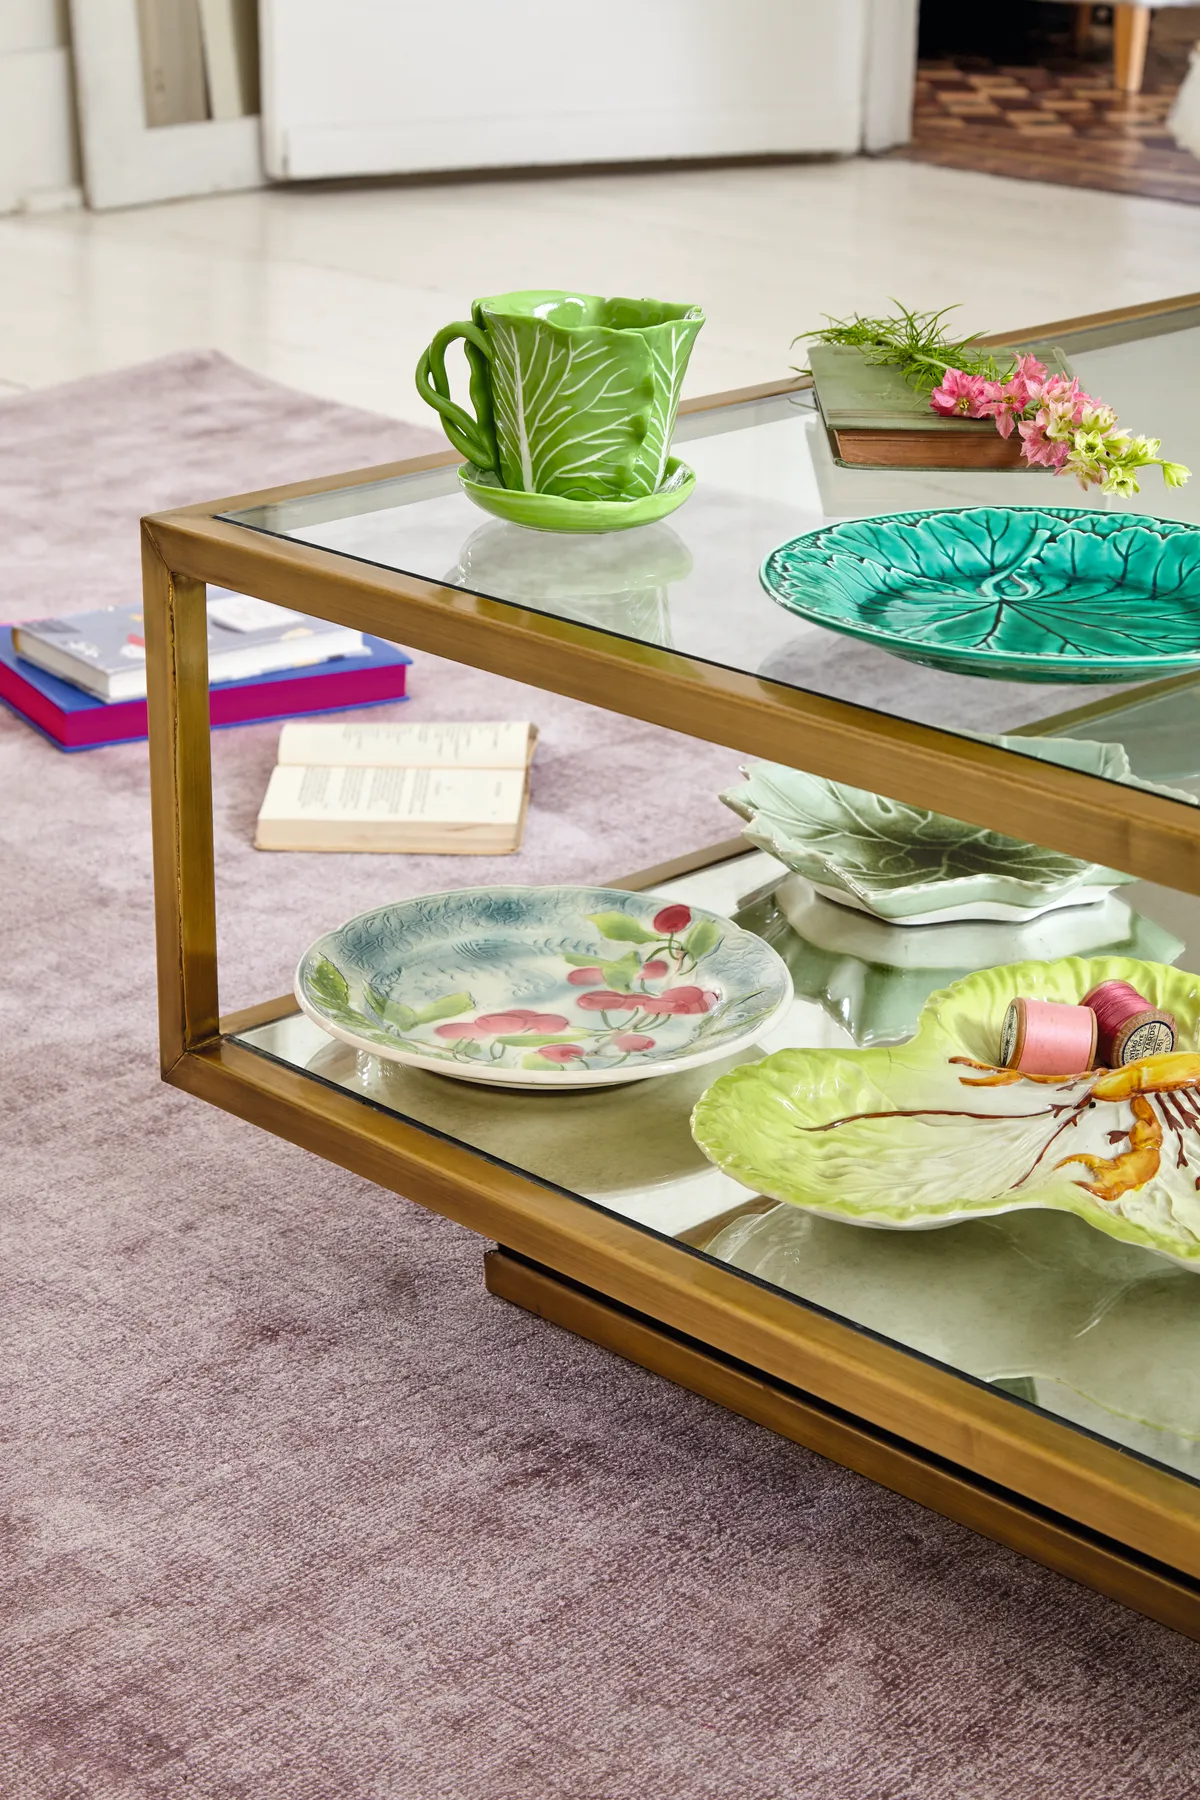 Place unusual plates on the bottom shelf of a glass coffee table for a display that’s easy to update and experiment with mixing old and new ceramics